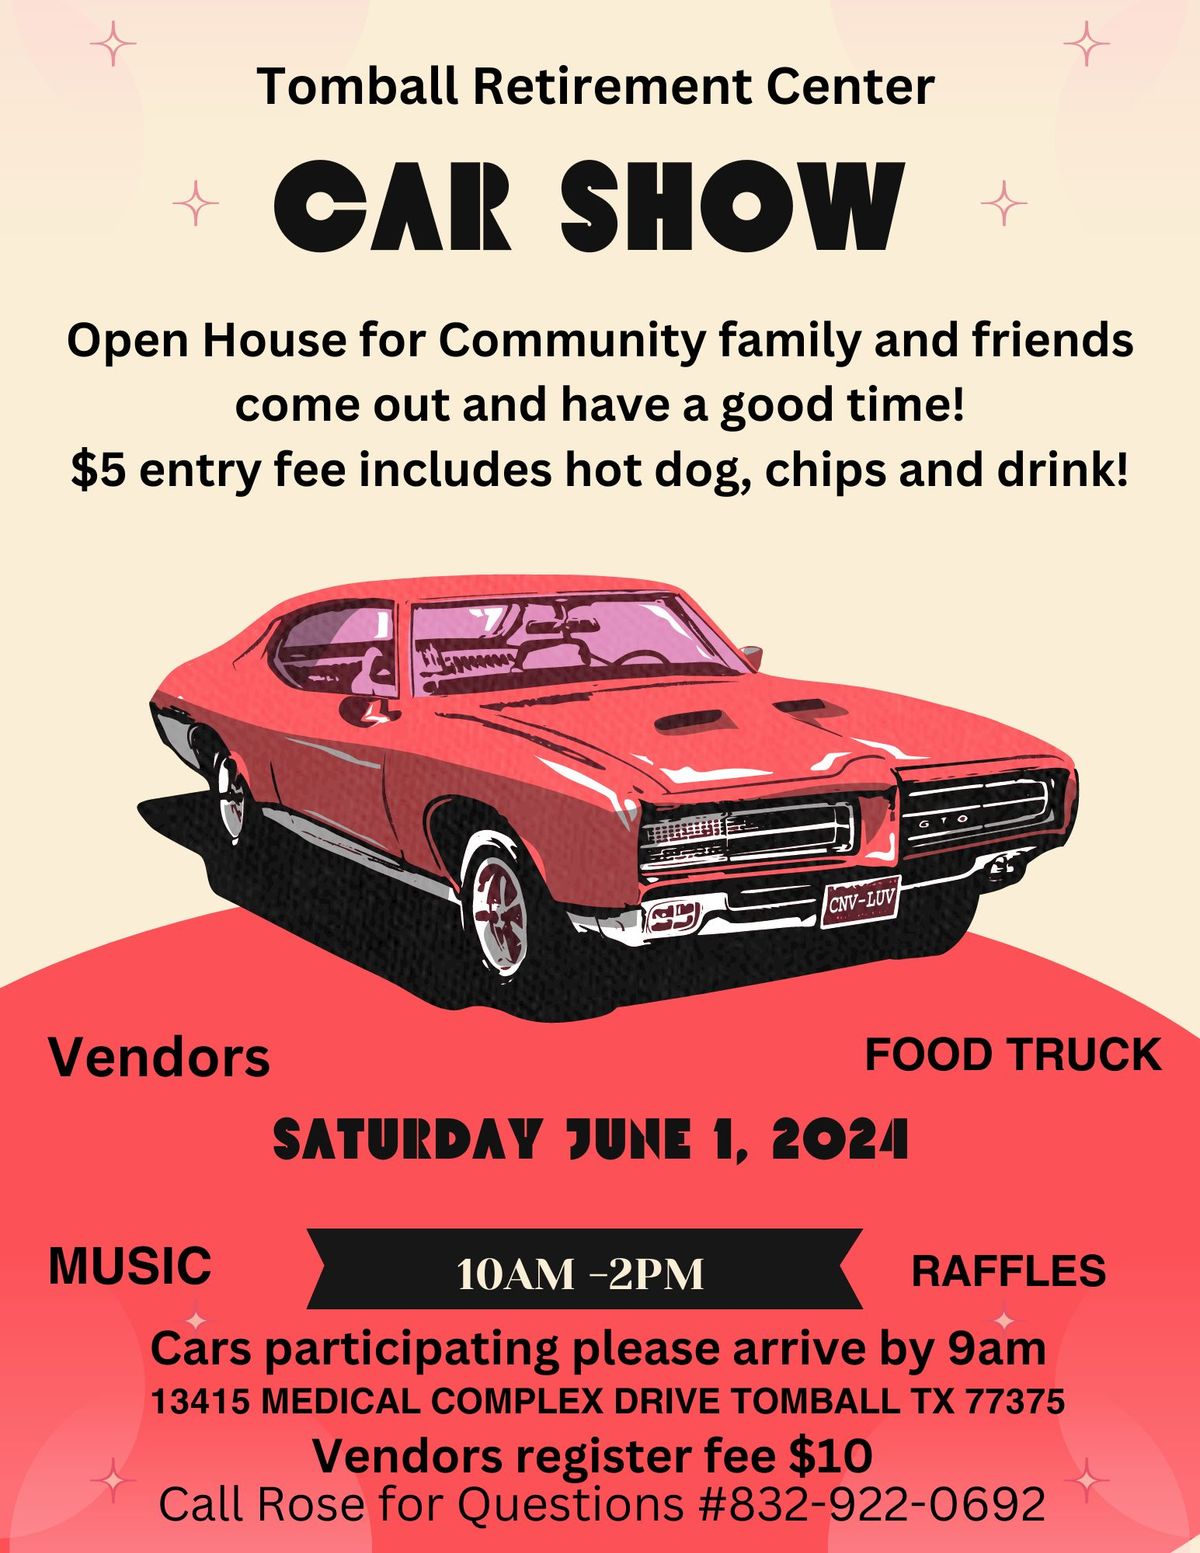 Car Show for Tomball Retirement Center